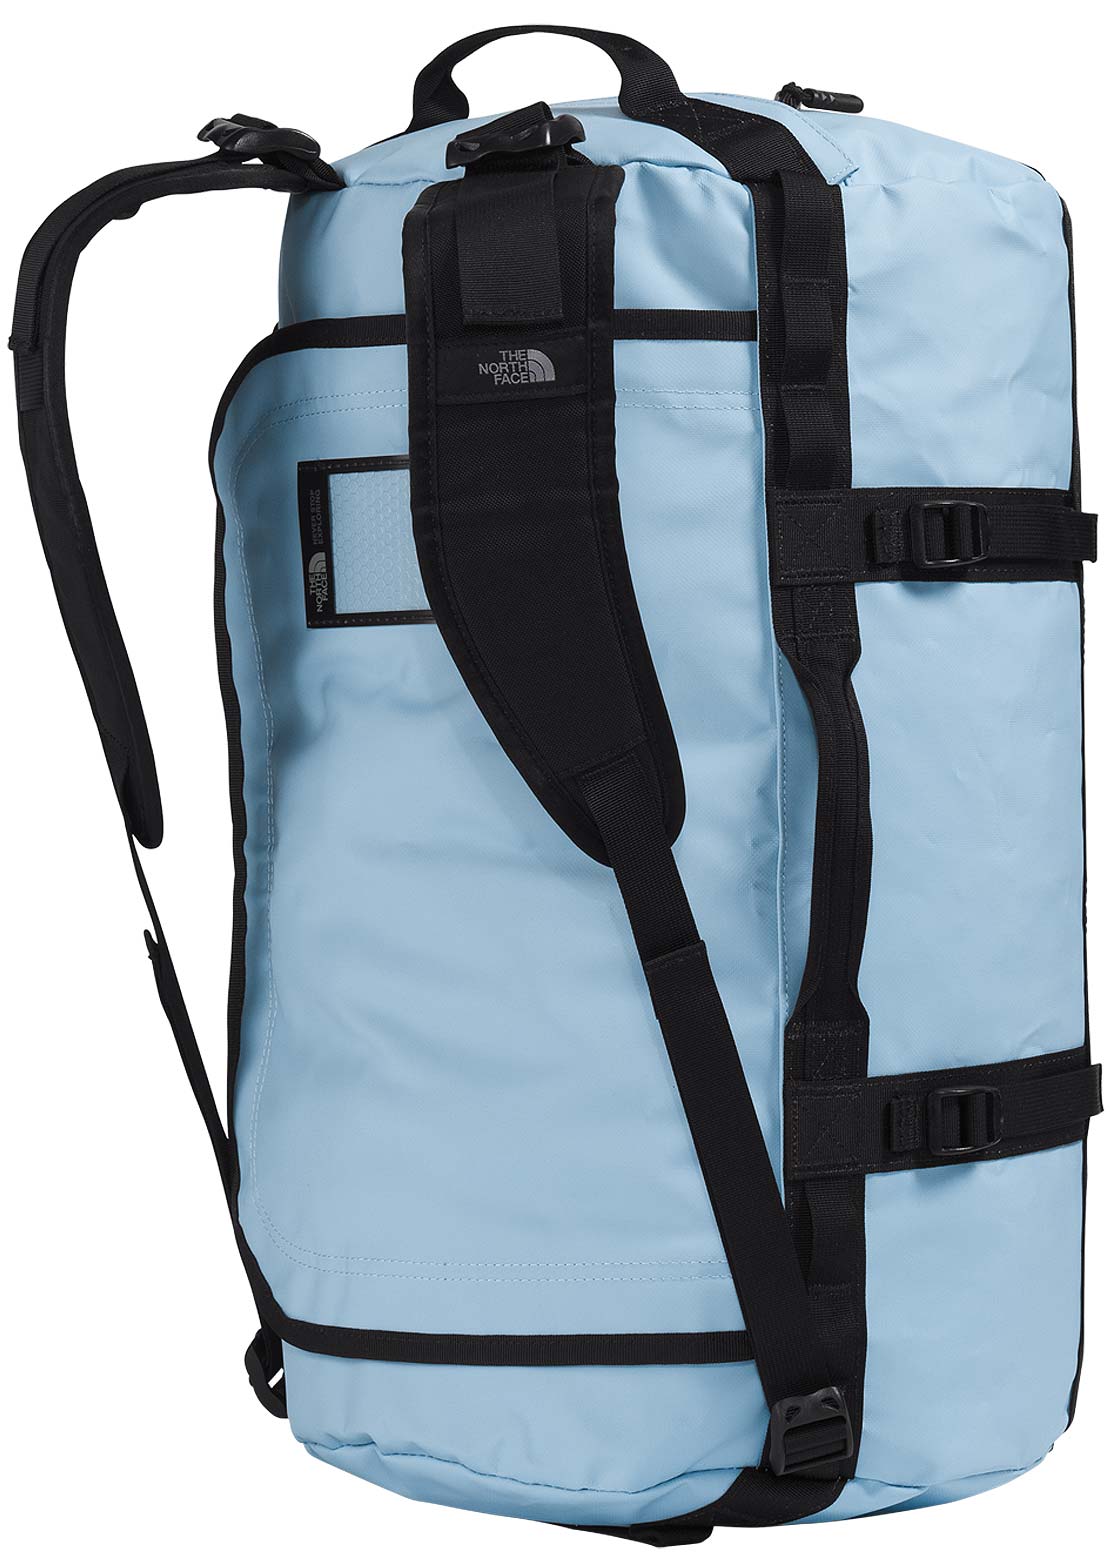 The North Face Base Camp S Duffel Bag Steel Blue/TNF Black